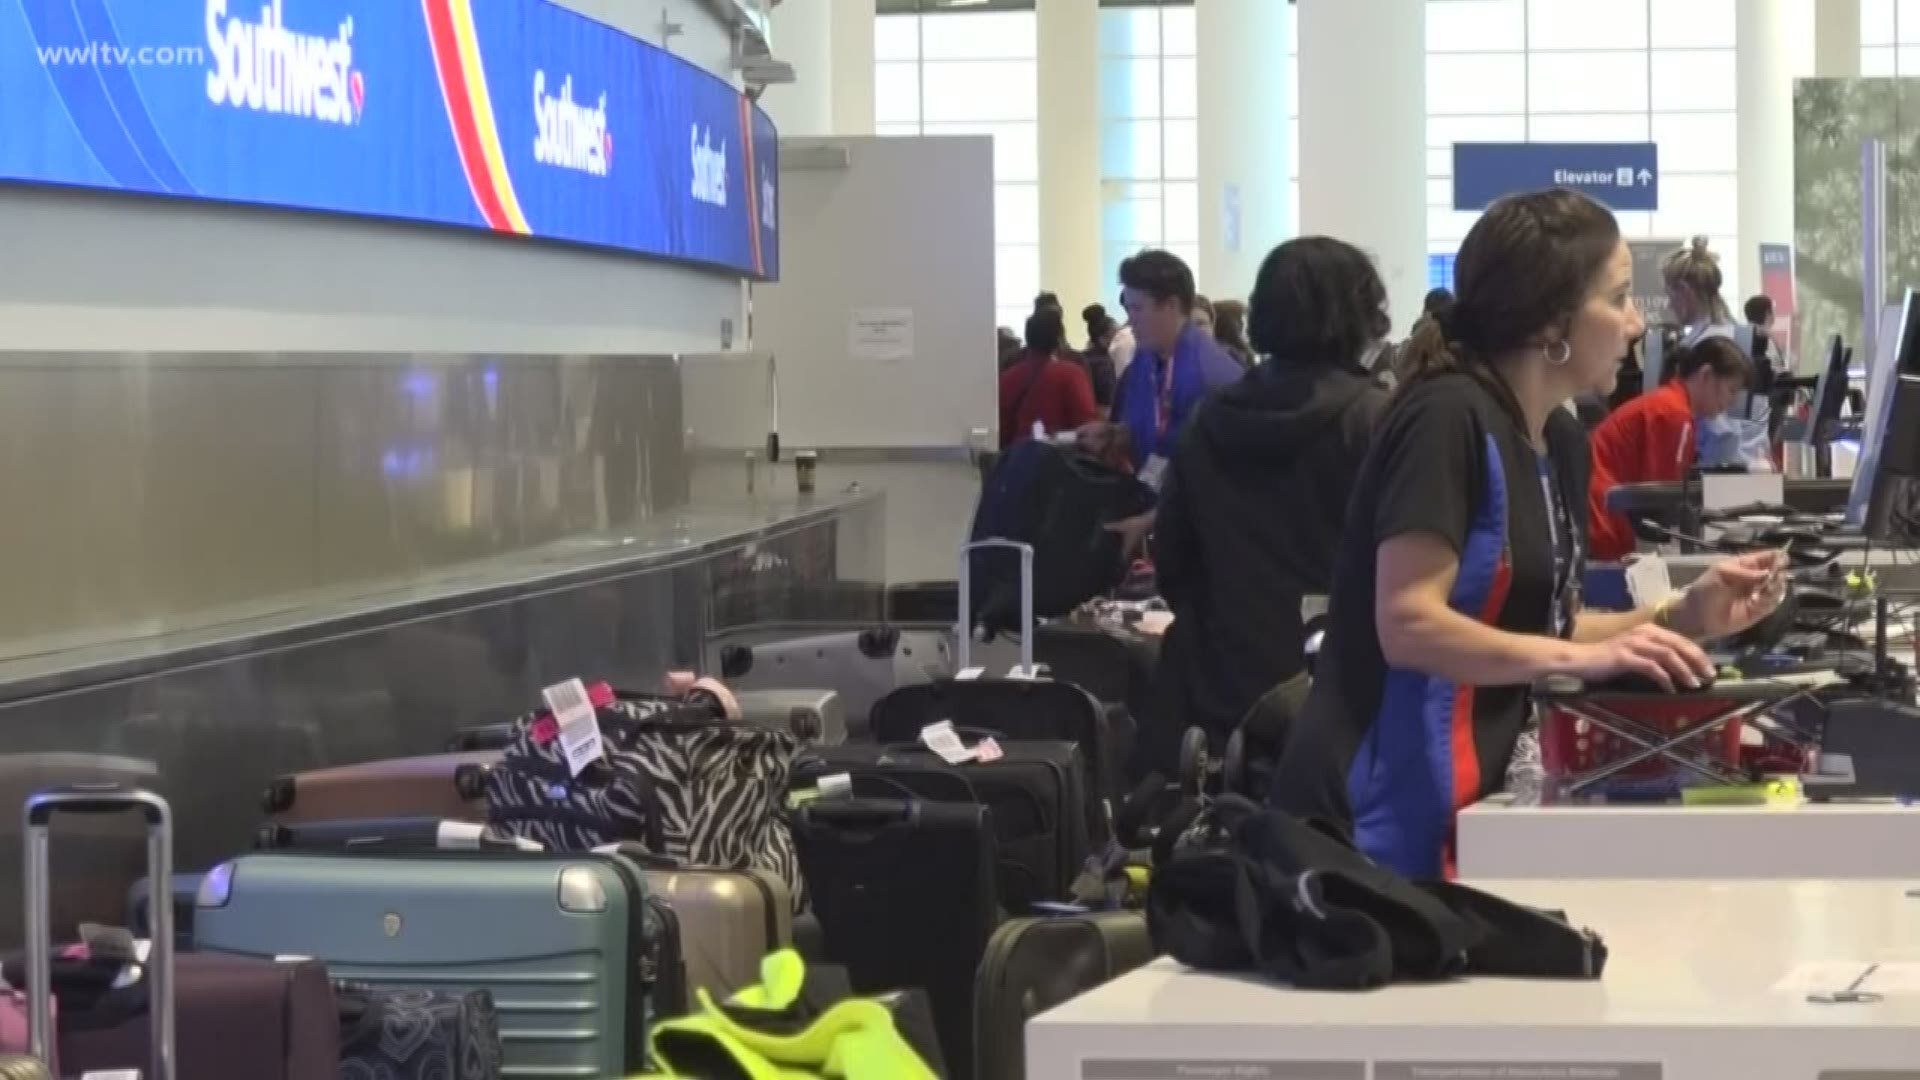 Some travelers were advised to move essentials into their carry-ons before checking bags.